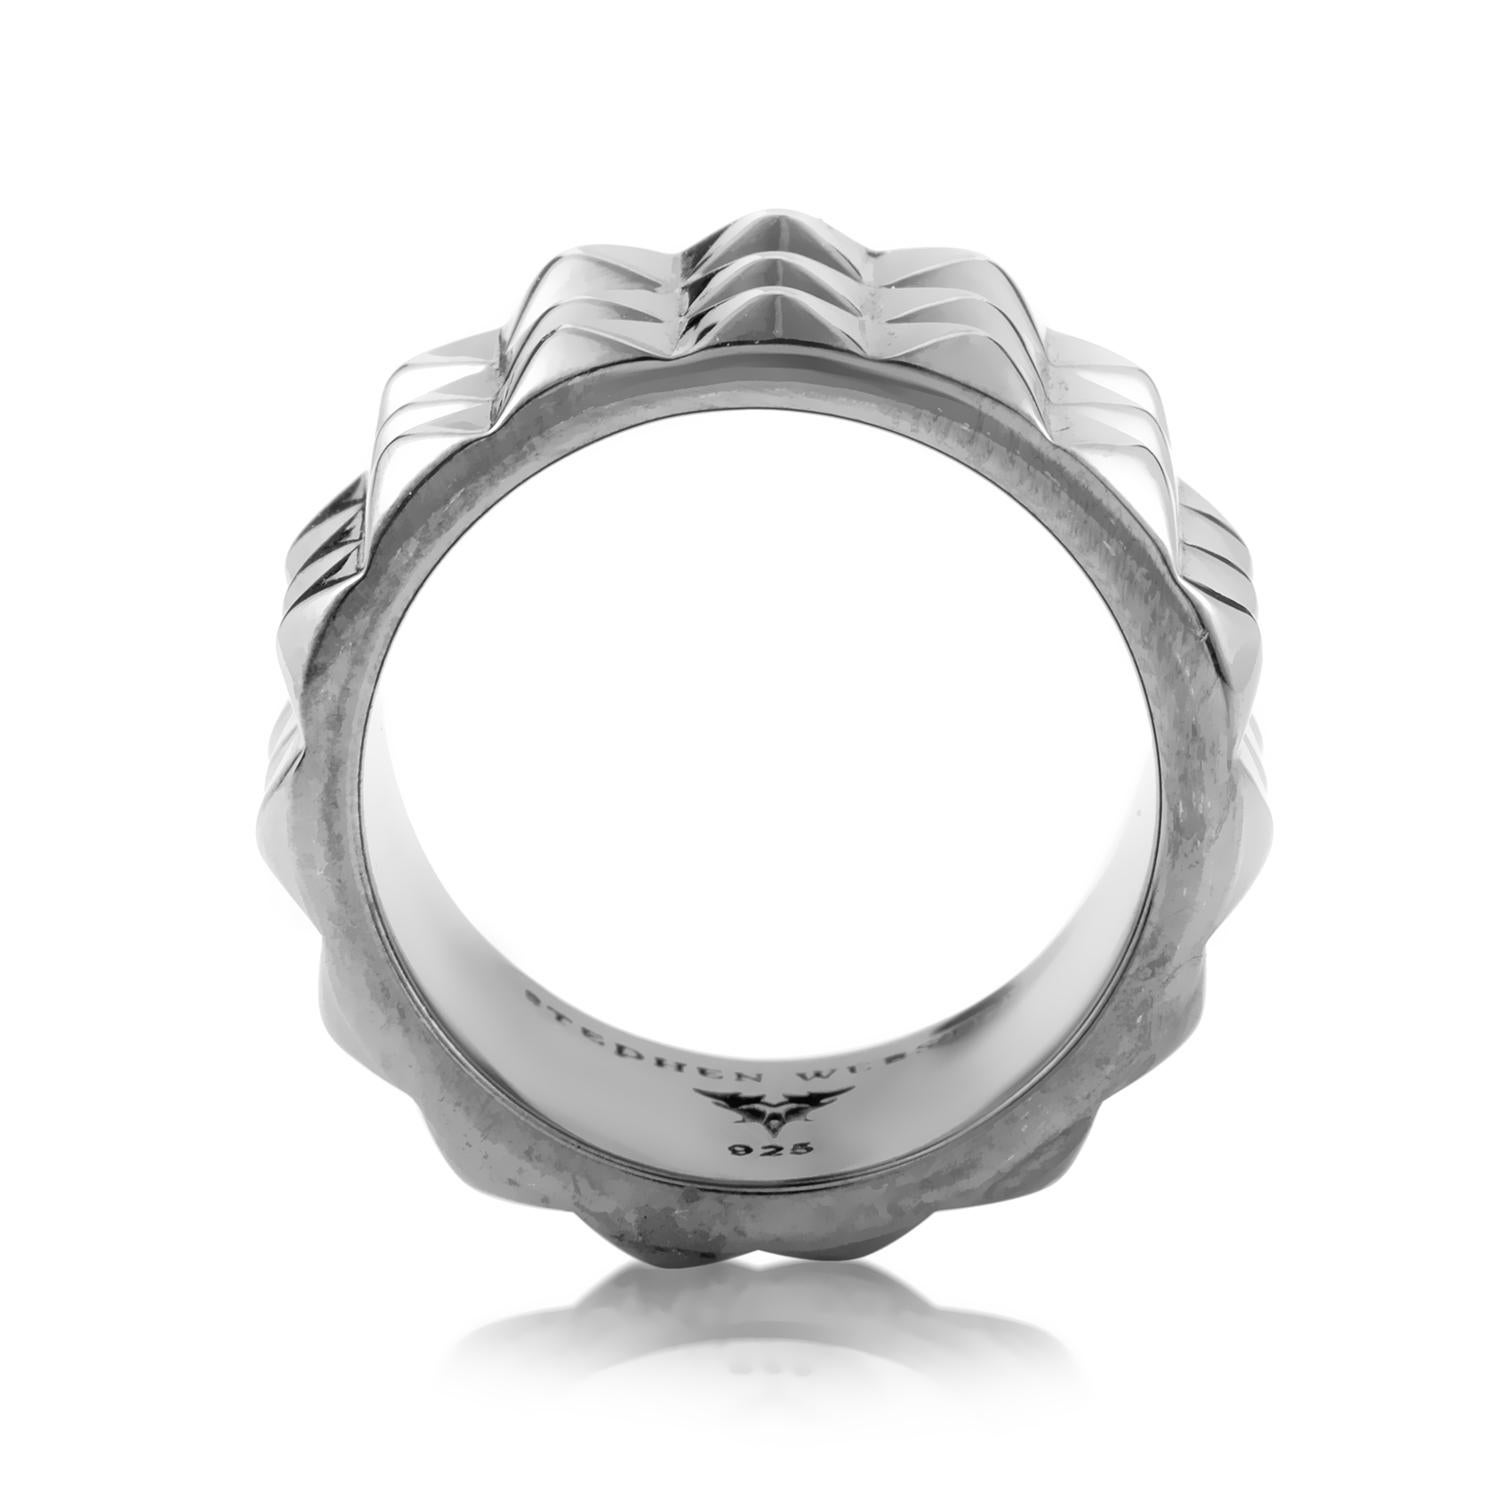 Stunningly crafted in shimmering sterling silver, this incredibly amazing Stephen Webster ring for men from the ever-so-brilliant 'Alchemy in the UK collection' offers an attractive masculine appearance owing to its spectacularly ingenious robust